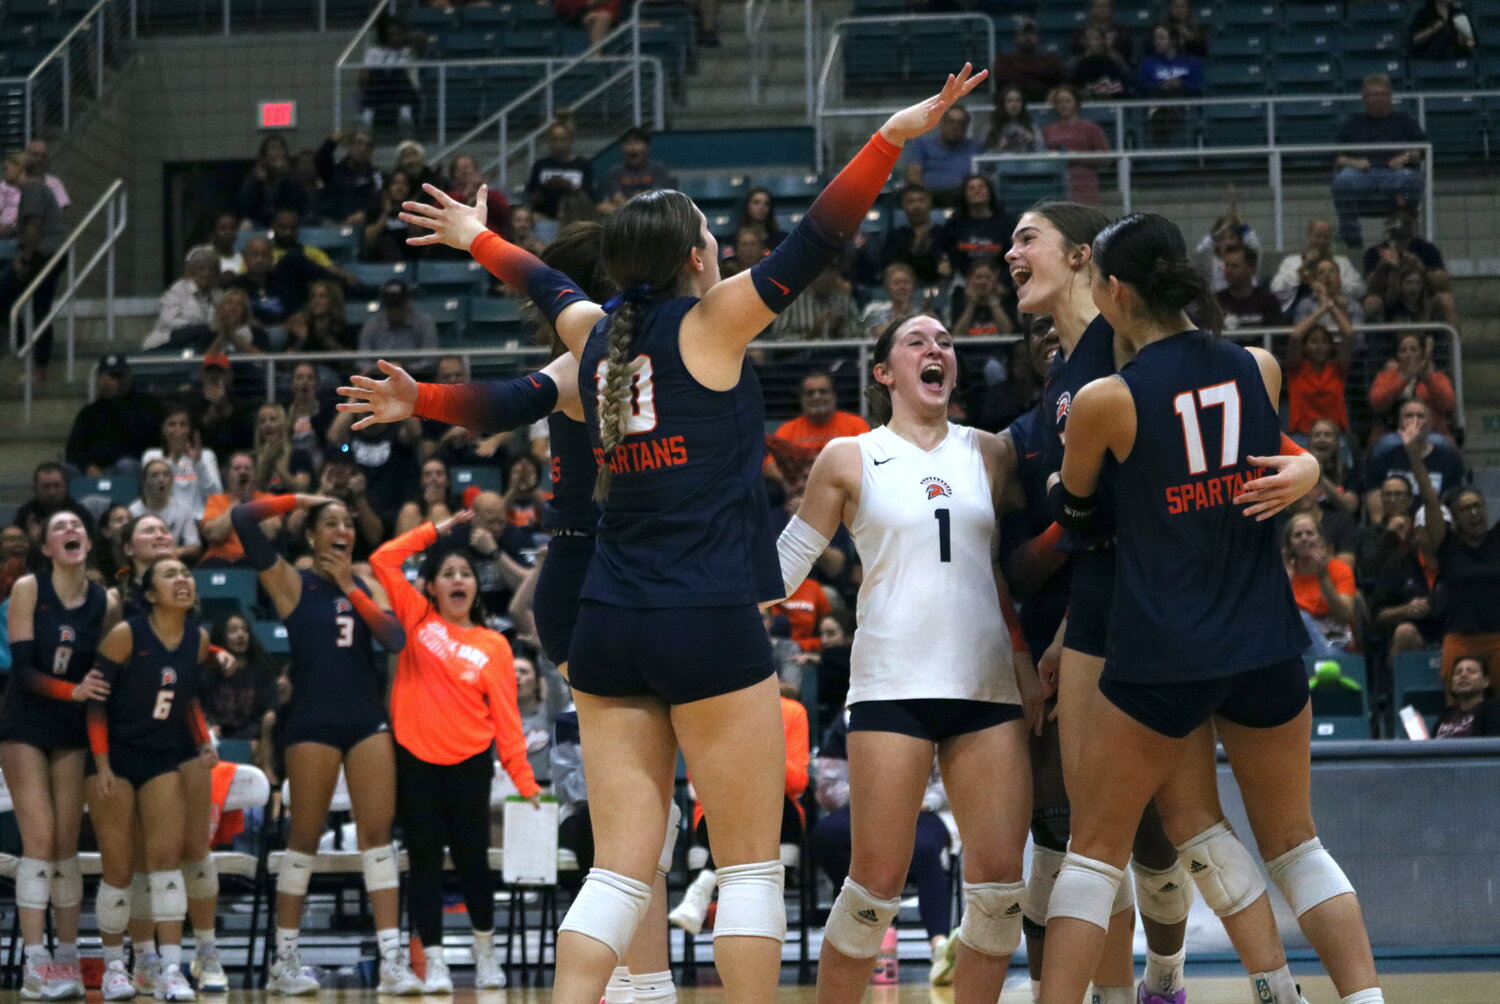 Seven Lakes players celebrate after winning a set during Tuesday’s match between Seven Lakes and Tompkins at the Merrell Center.